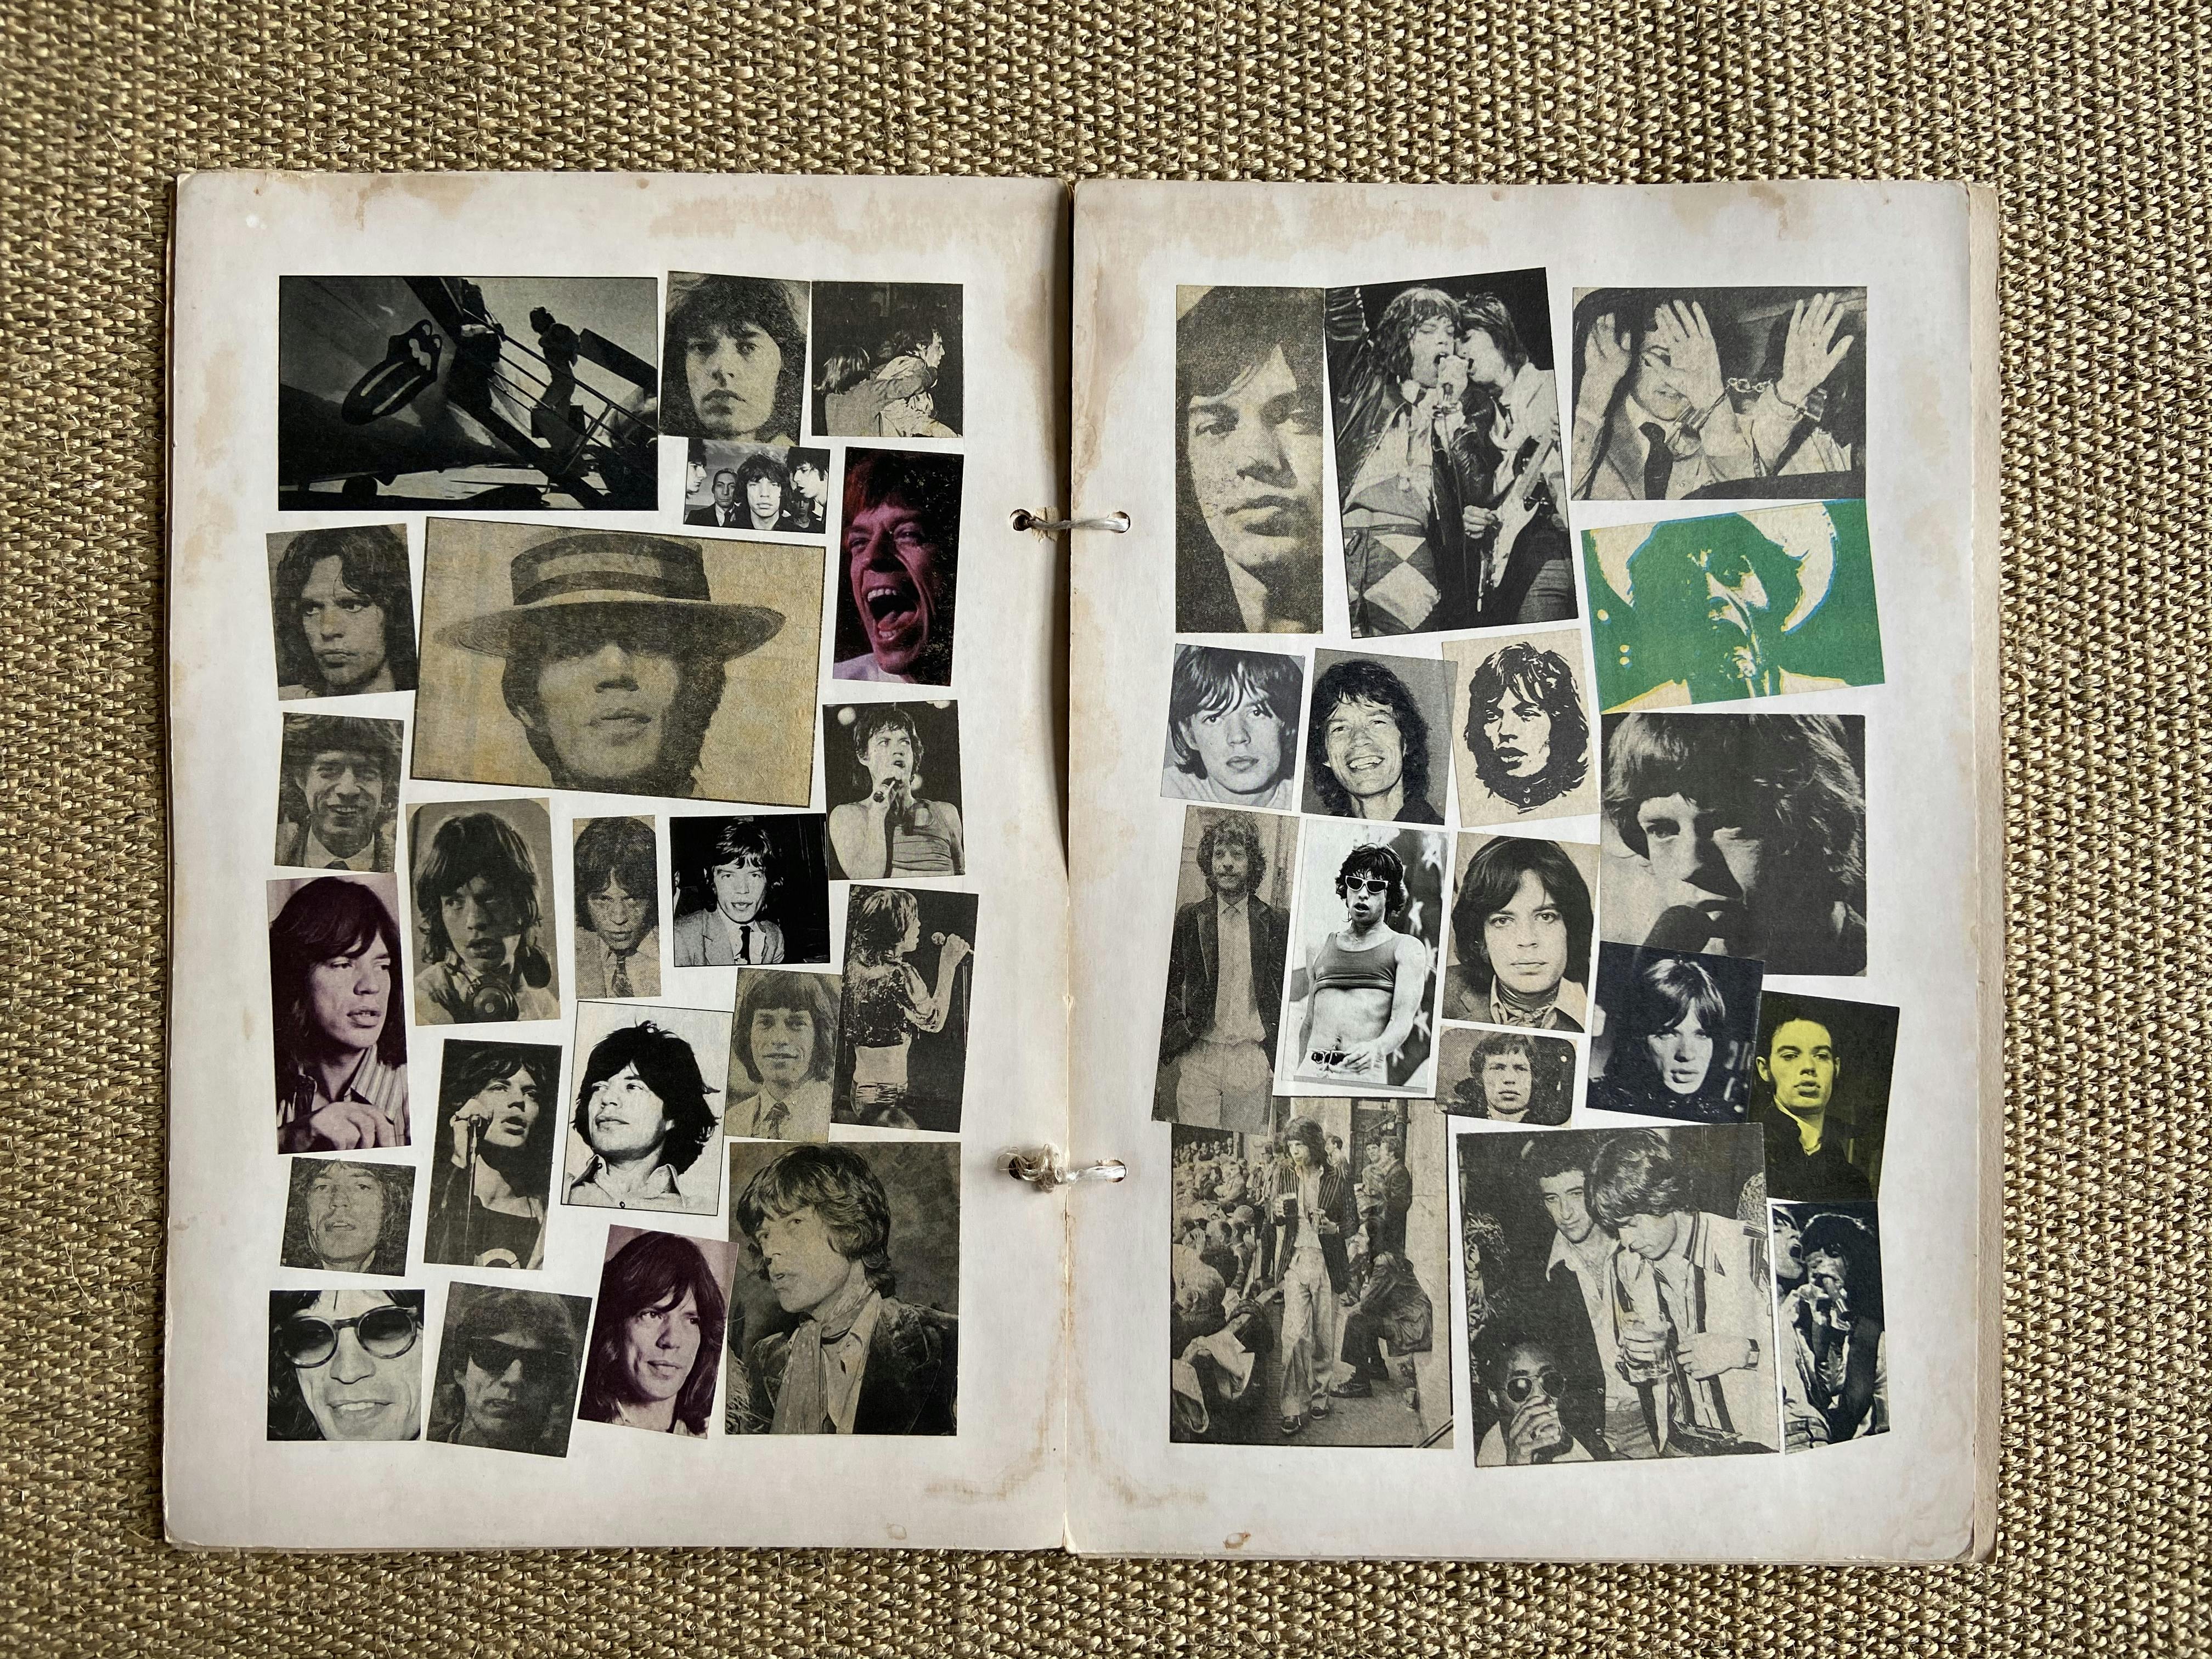 A scrapbook of hand cut newspaper images of the singer Mick Jagger. The paper is yellowed and old and it is held together with some string. 